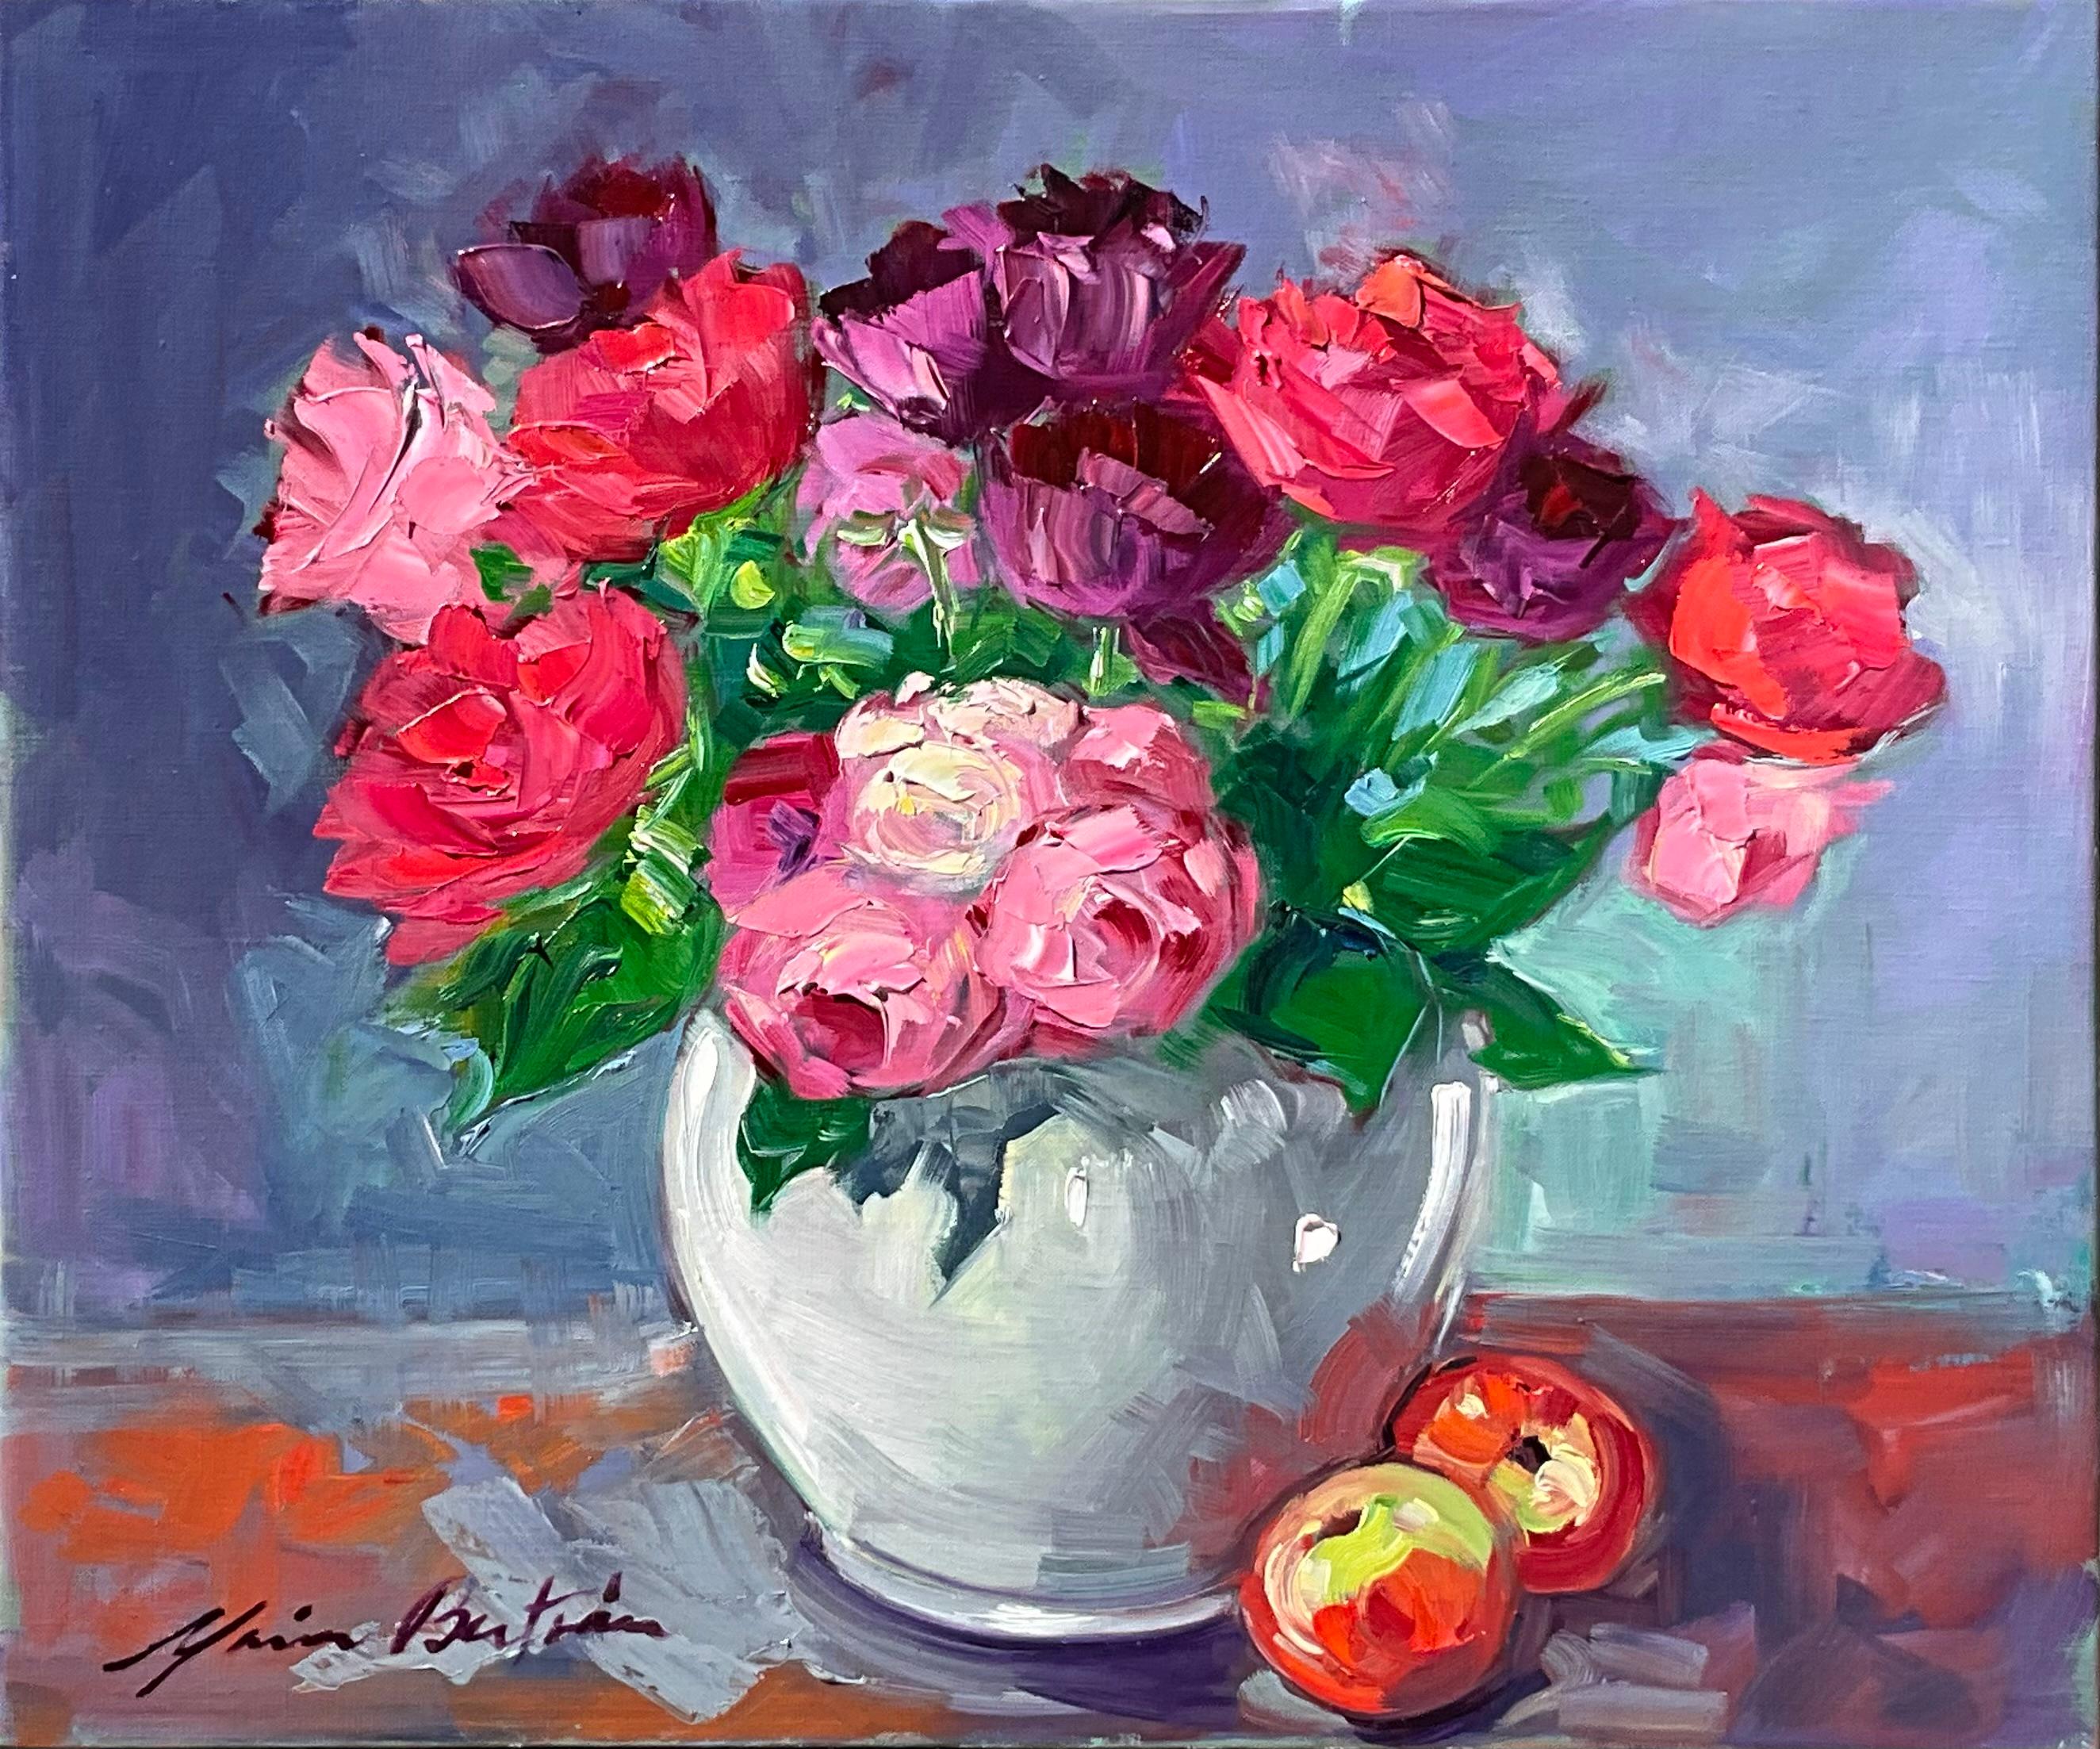 Maria Bertrán Still-Life Painting - "Roses and Tulips" Contemporary Impressionist Still Life Oil